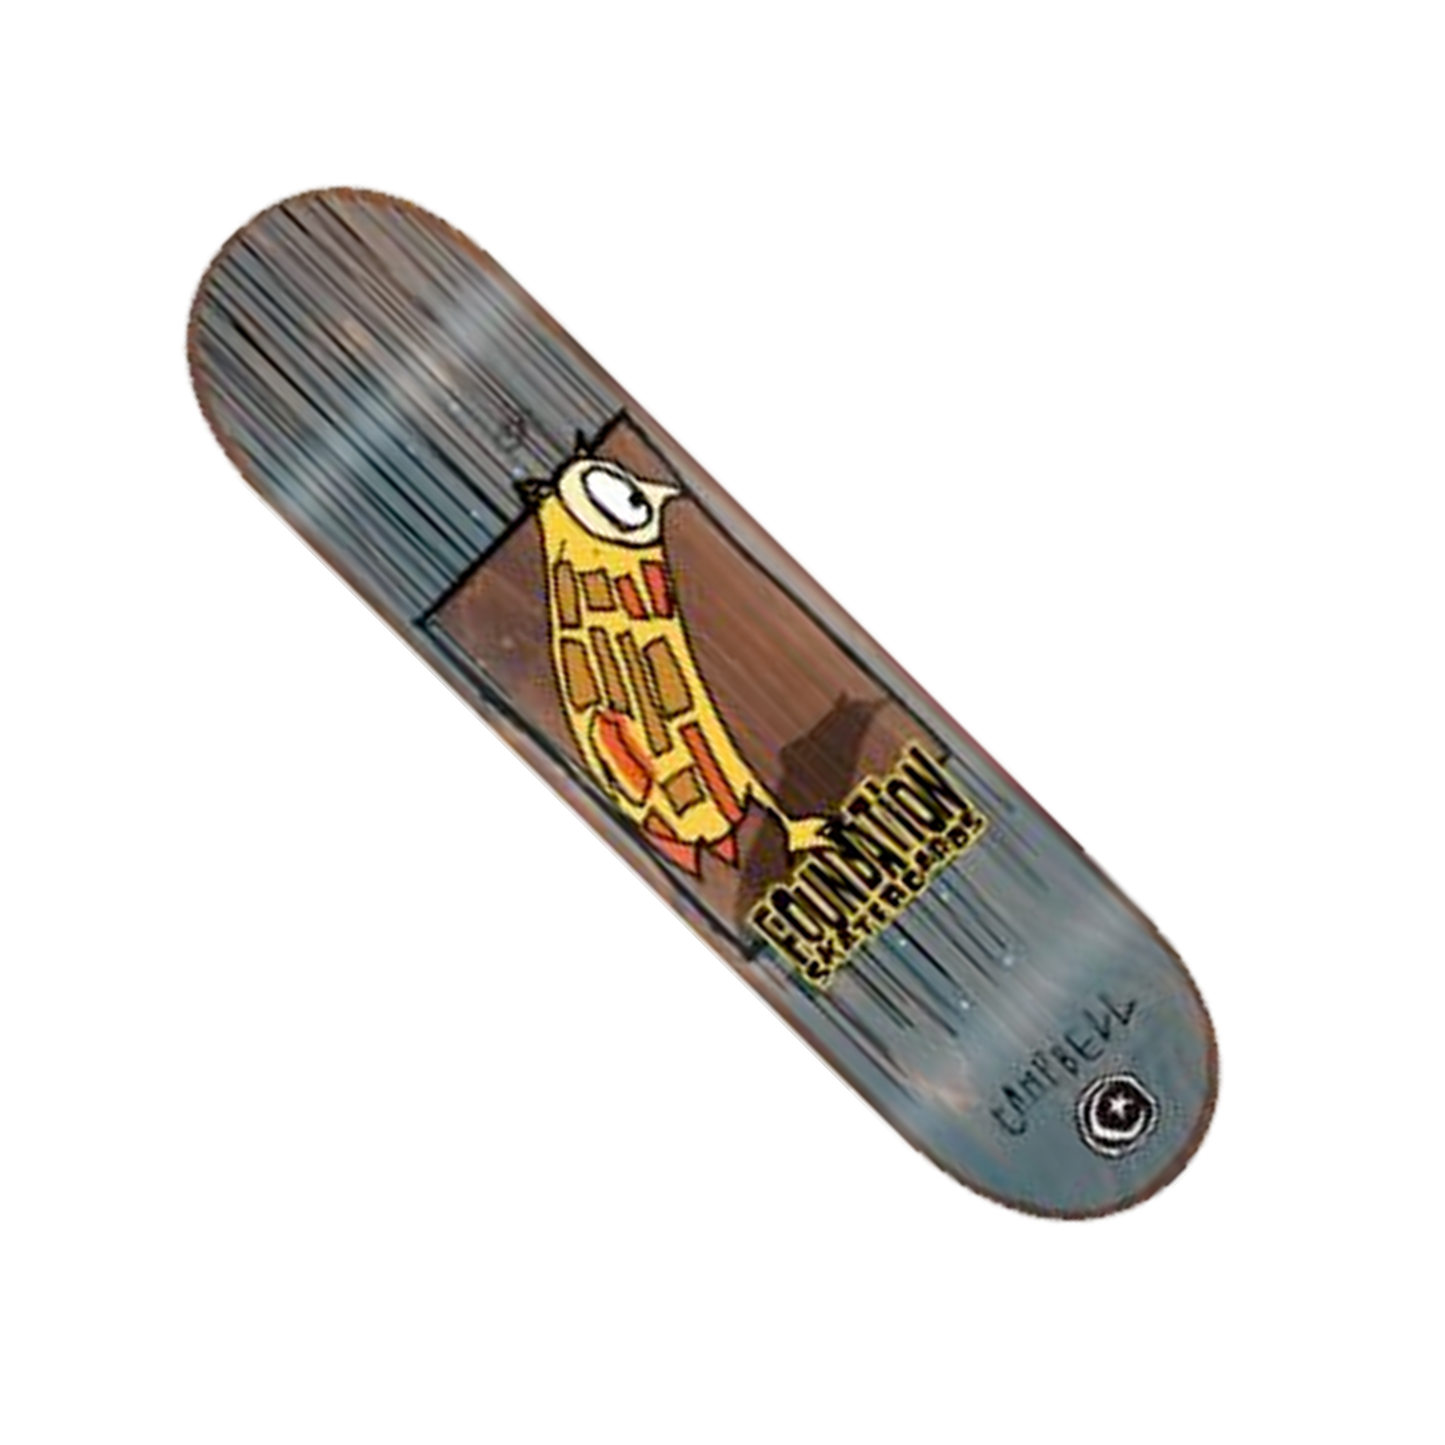 Foundation Adian Campbell "Owl" Deck - 8.38